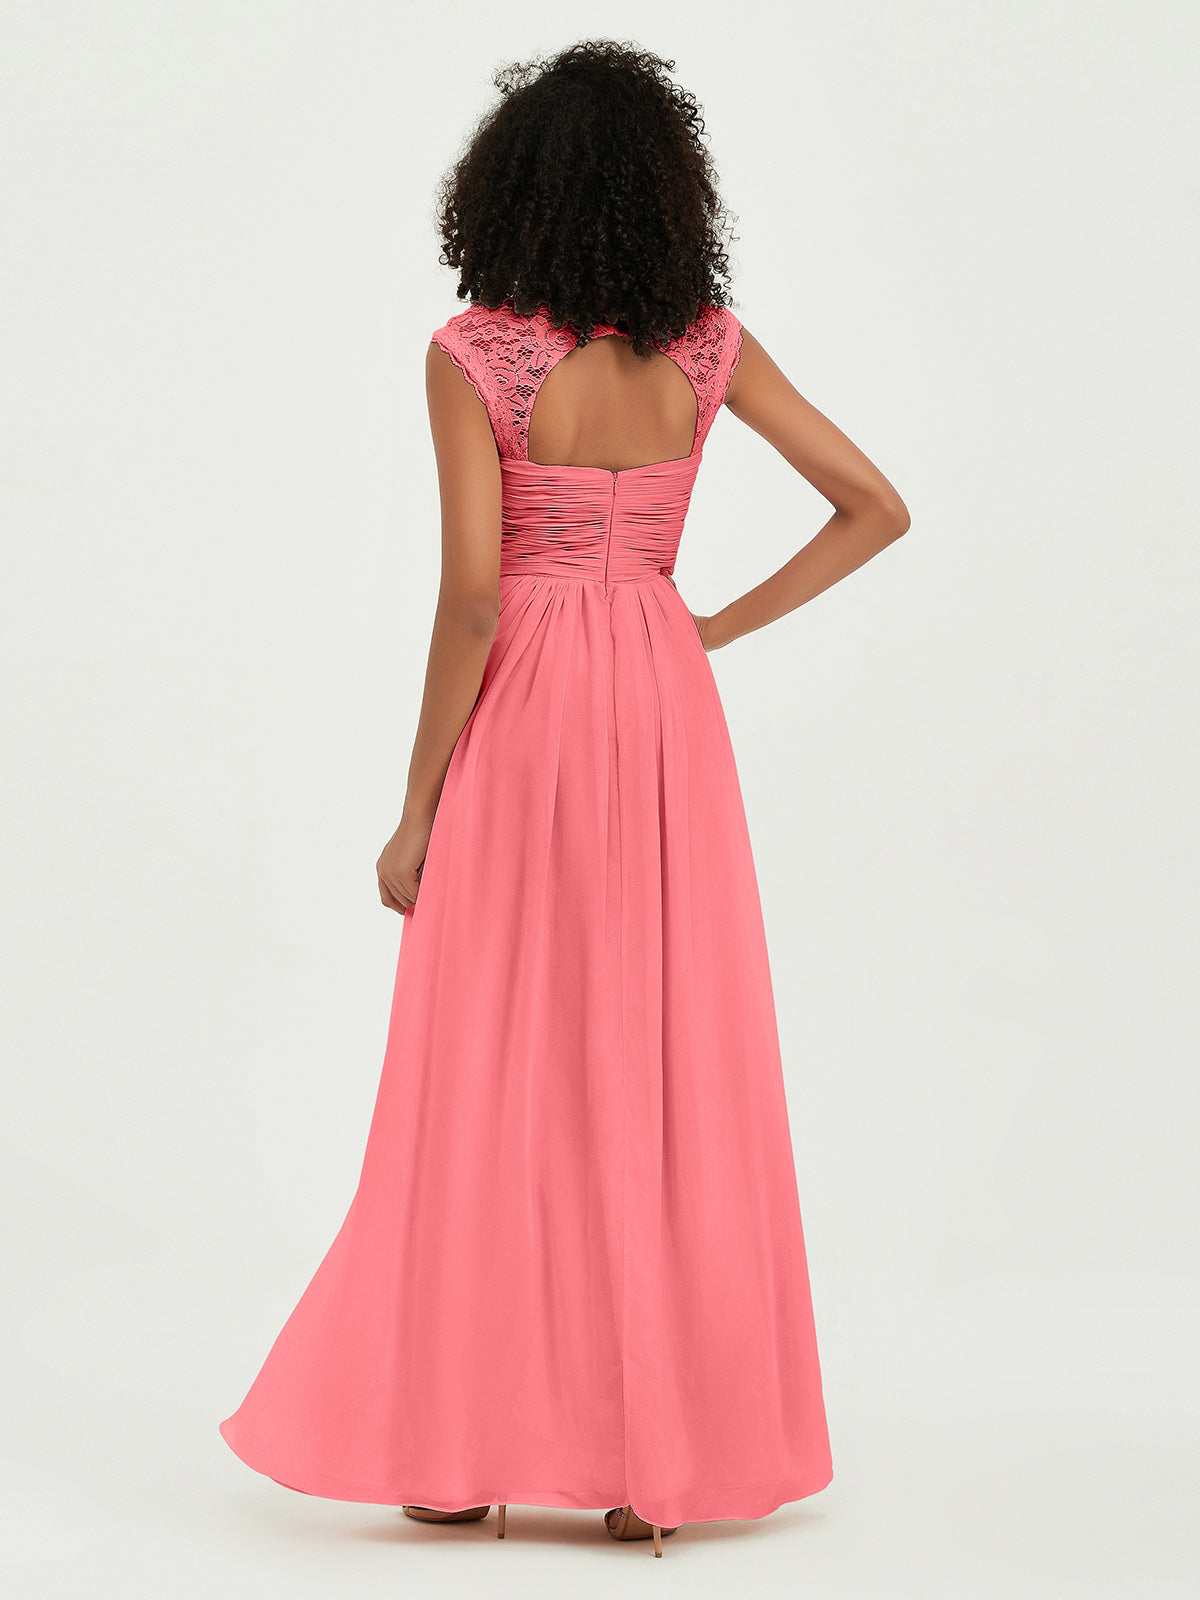 Sweetheart Chiffon Dresses with Lace Cap Sleeves Watermelon